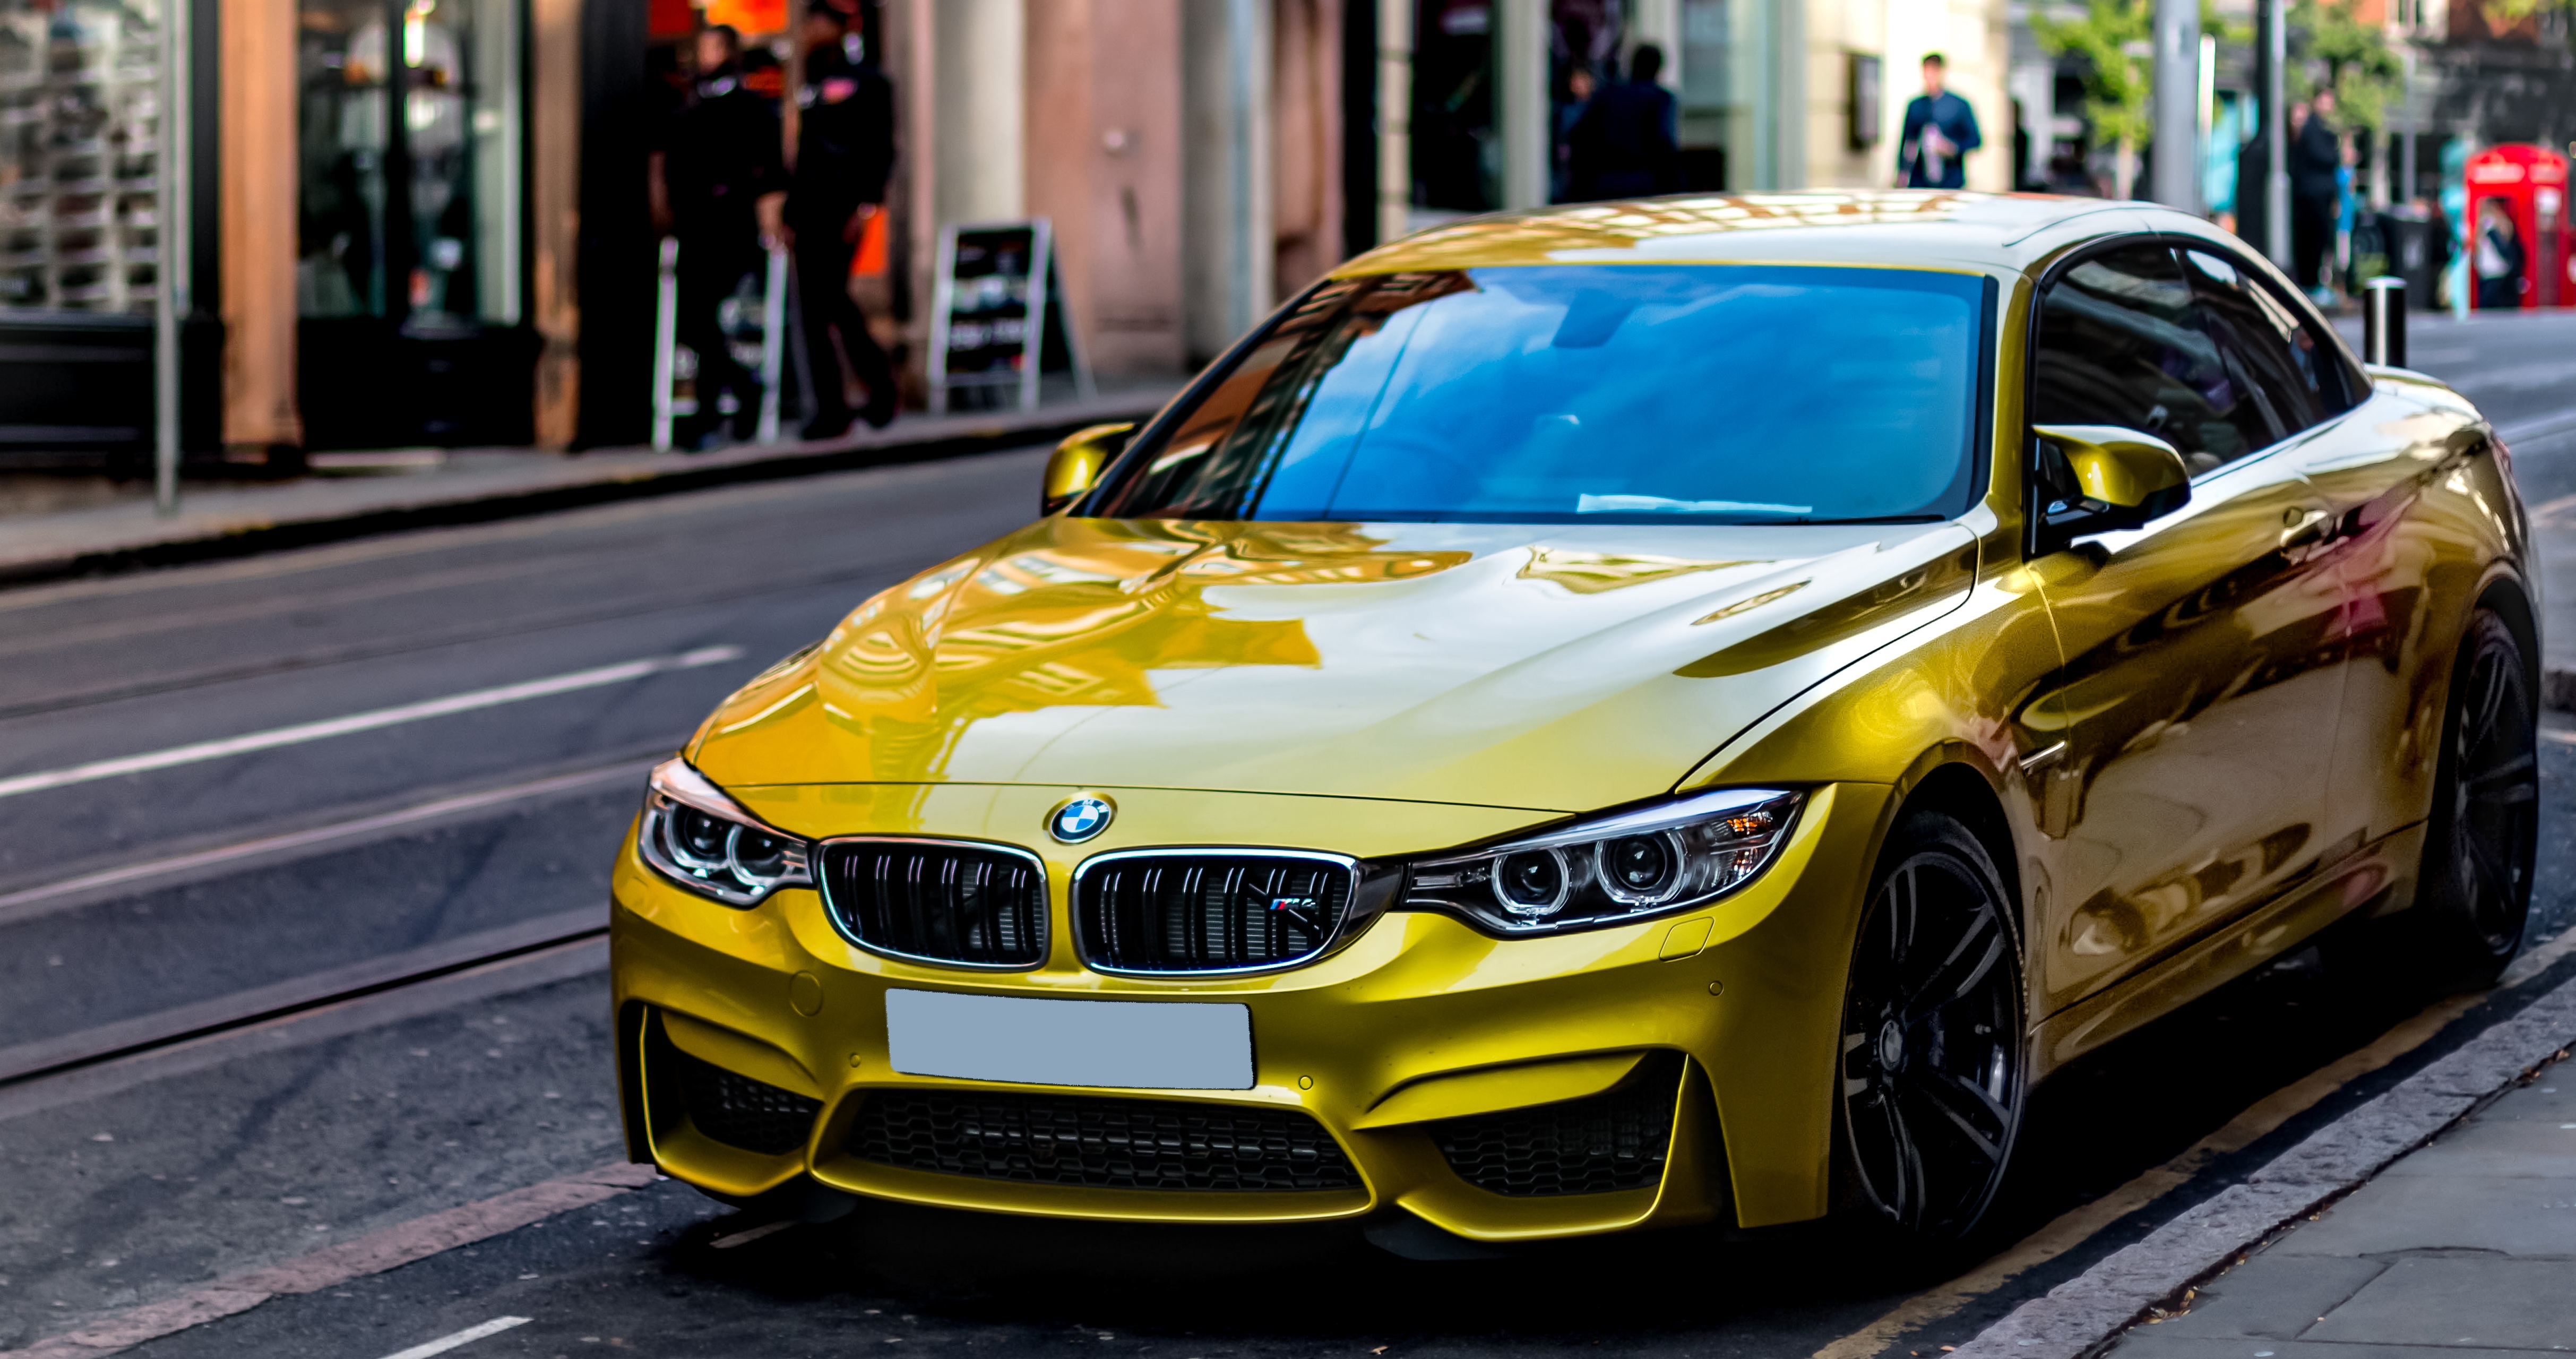 cars, auto, yellow, side view, style Image for desktop